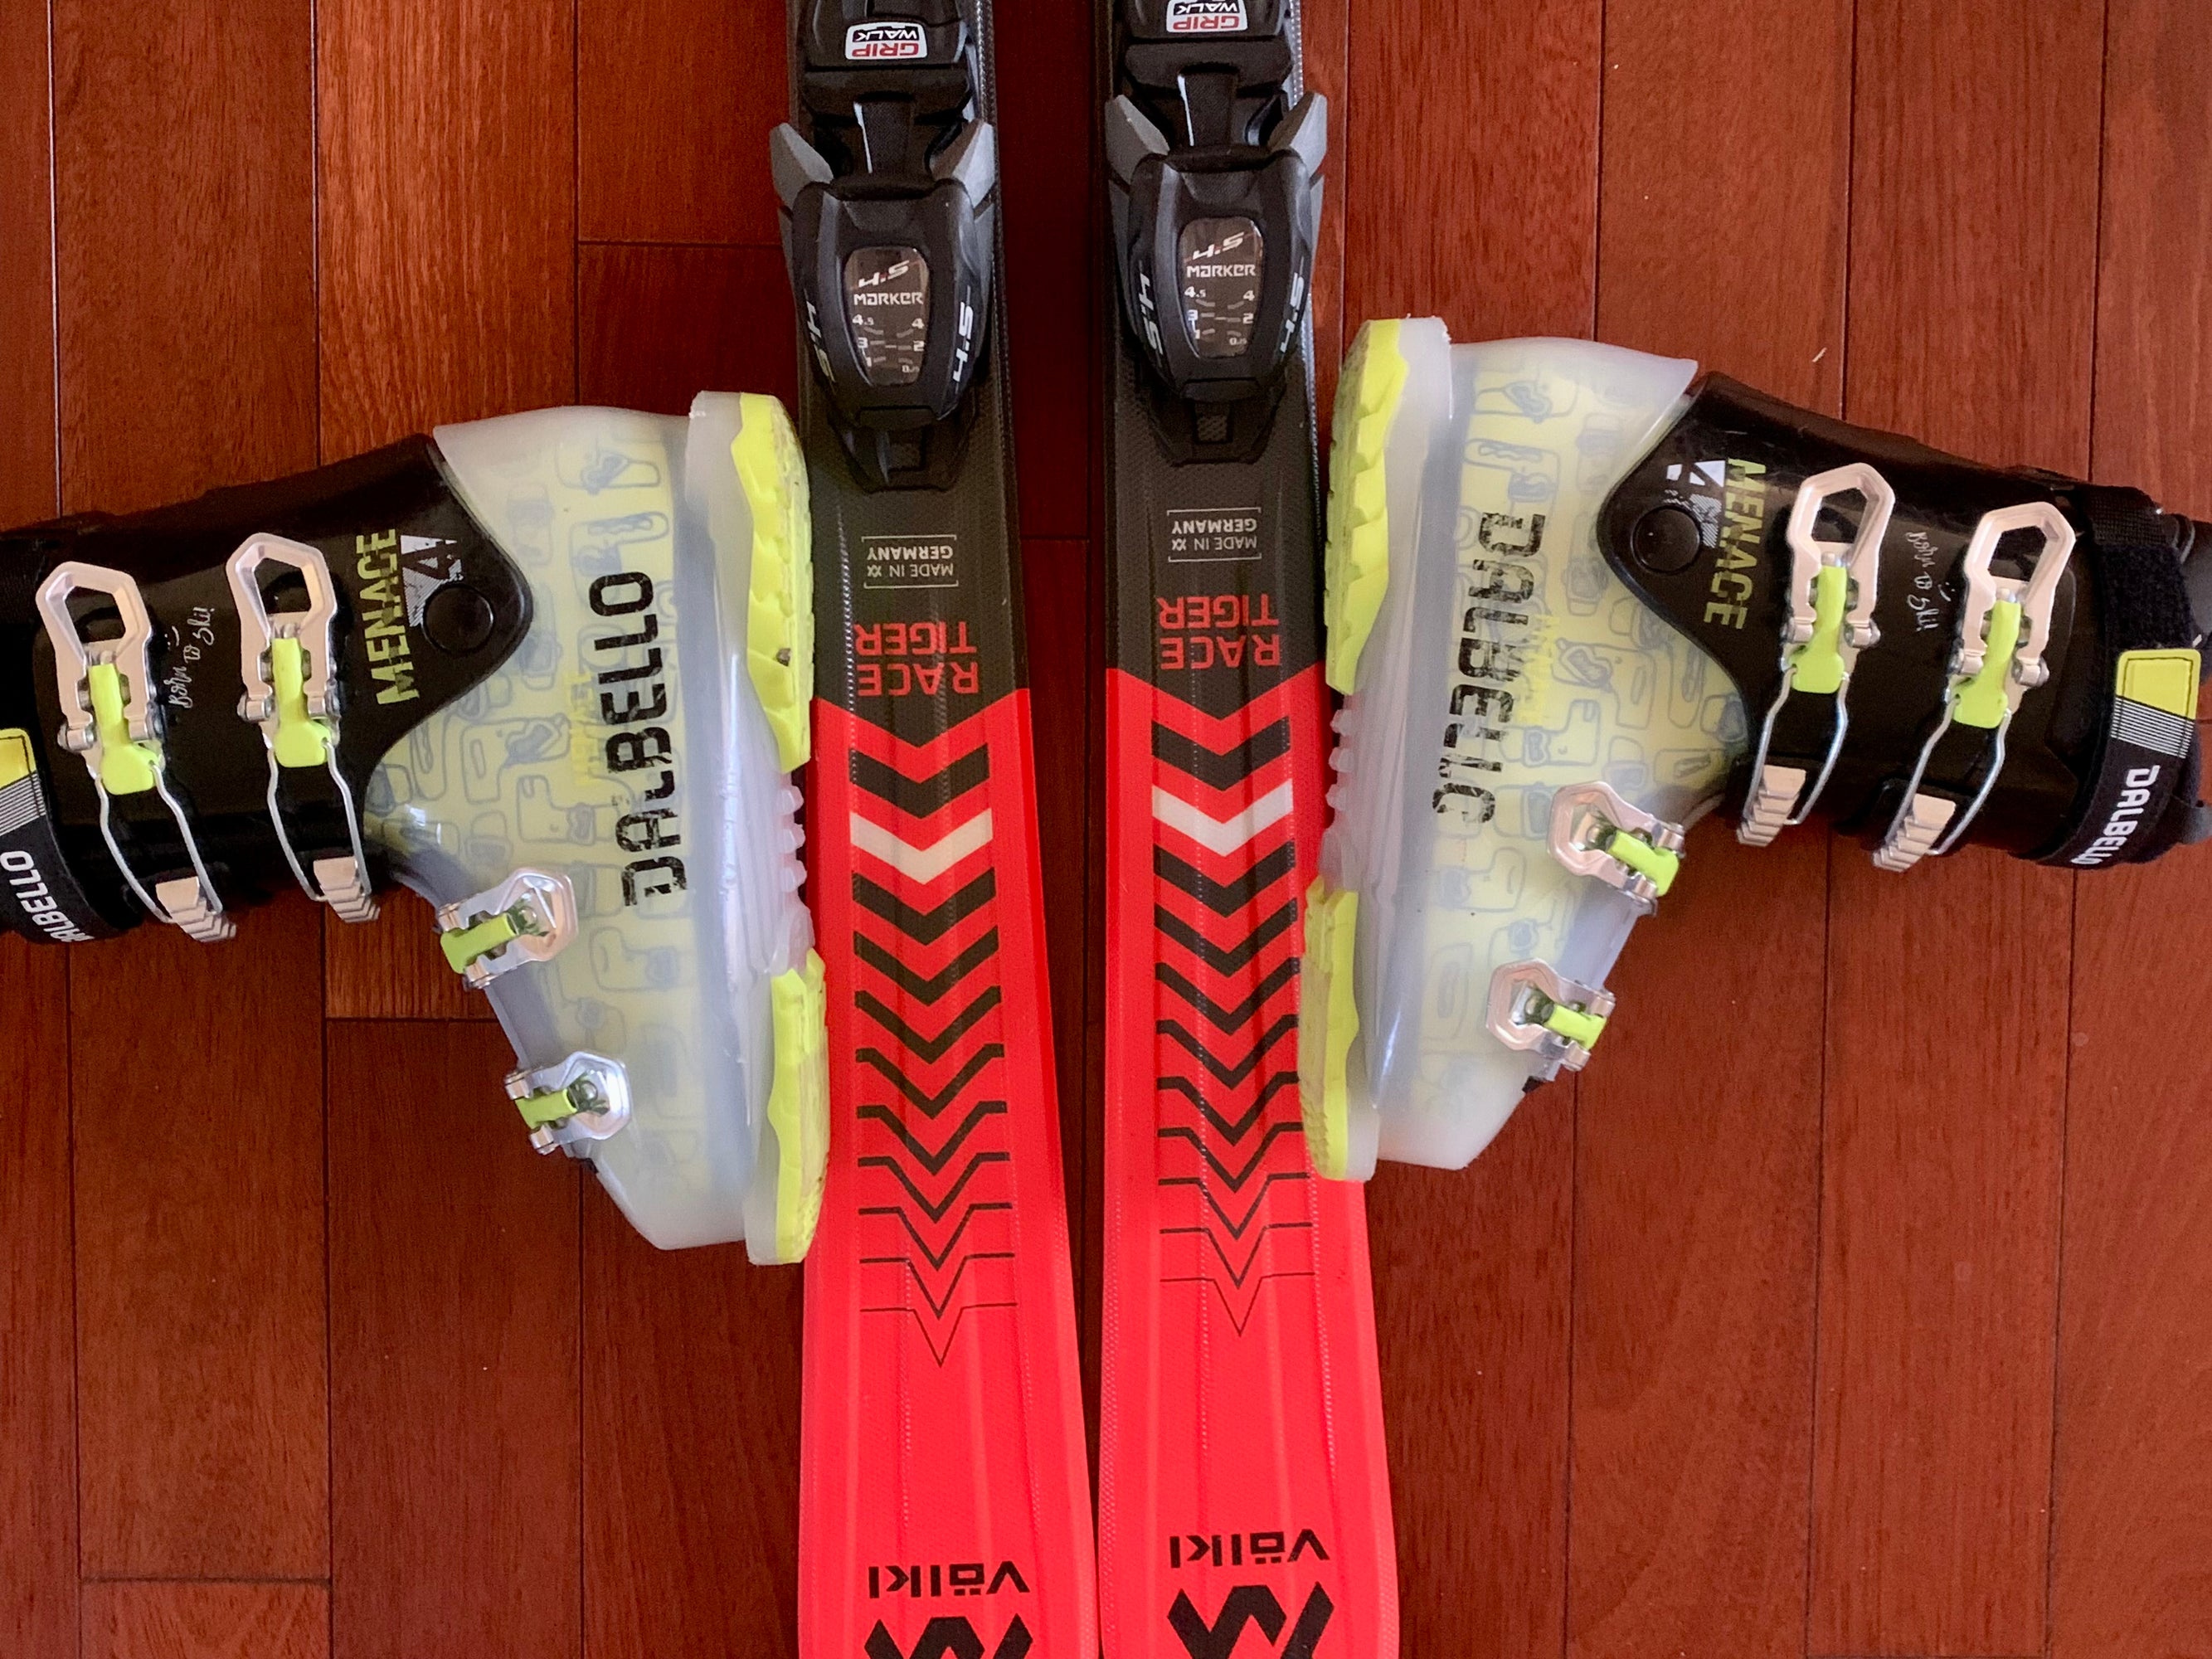 Used 2021 Volkl 130 cm All Mountain Skis With Bindings, boots and poles ...